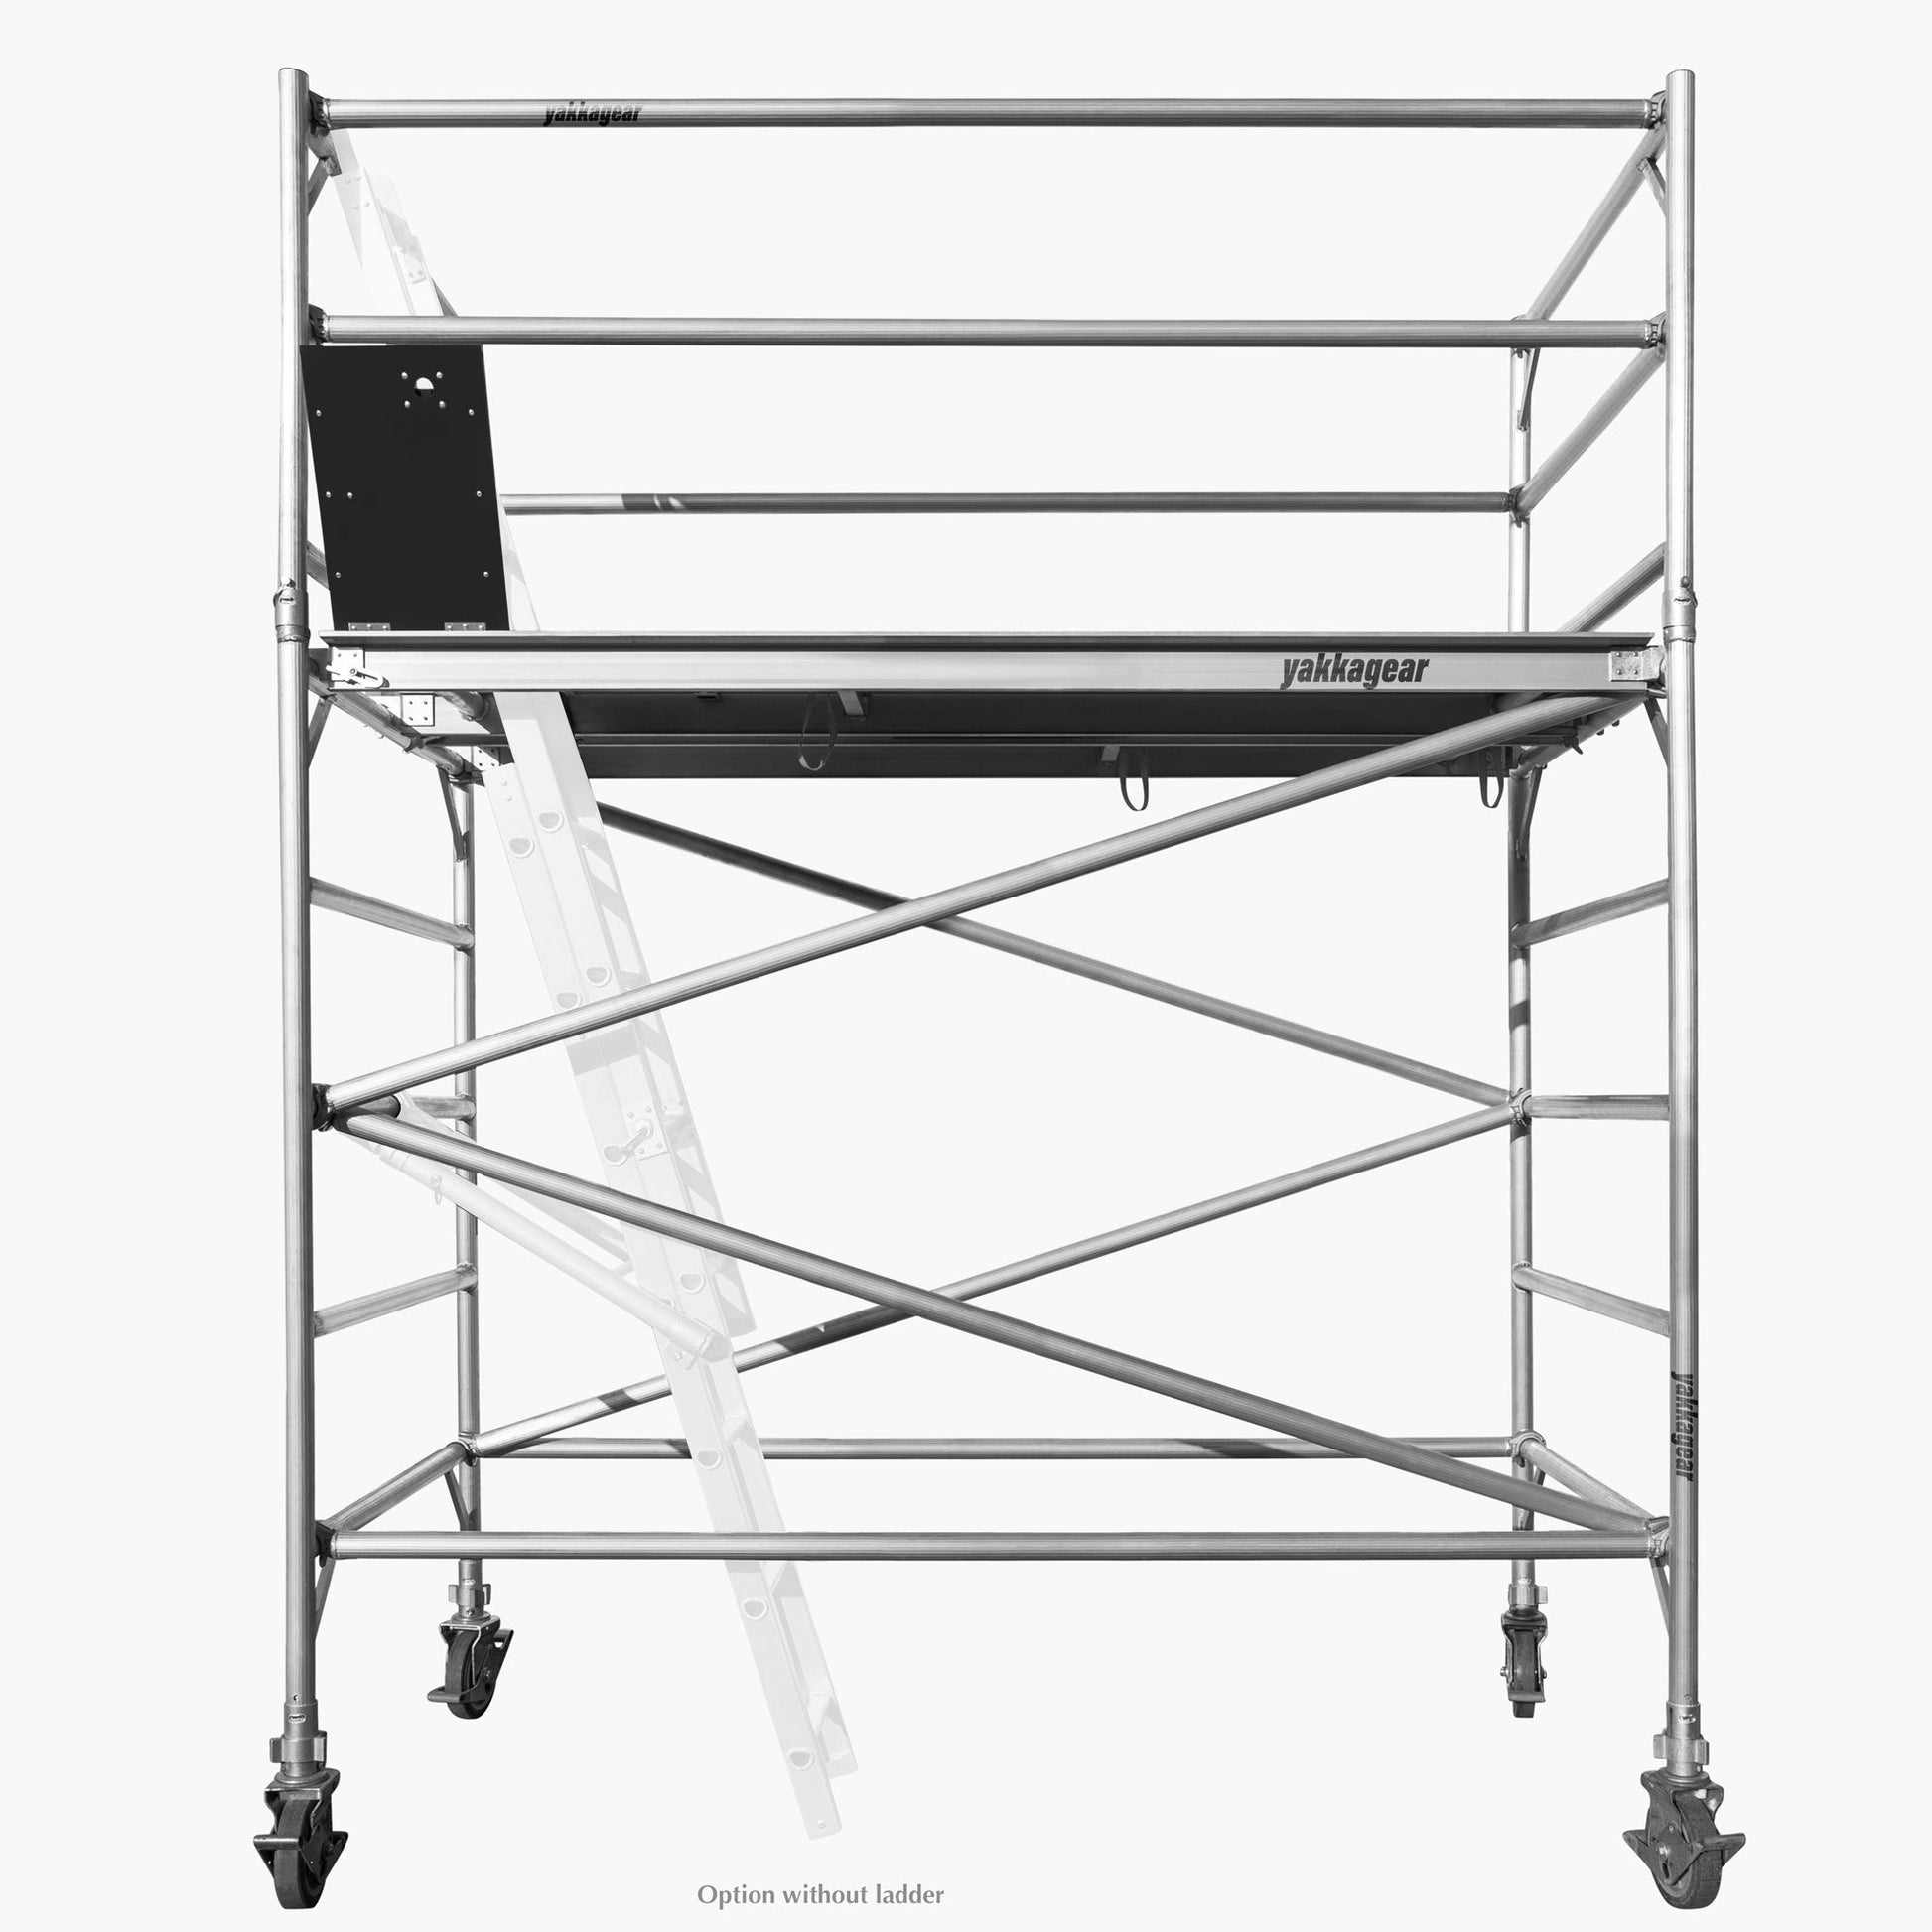 4.6m Reach (2.6m Platform) Aluminium Mobile Scaffolding | Yakka Gear - from the front, without ladder.